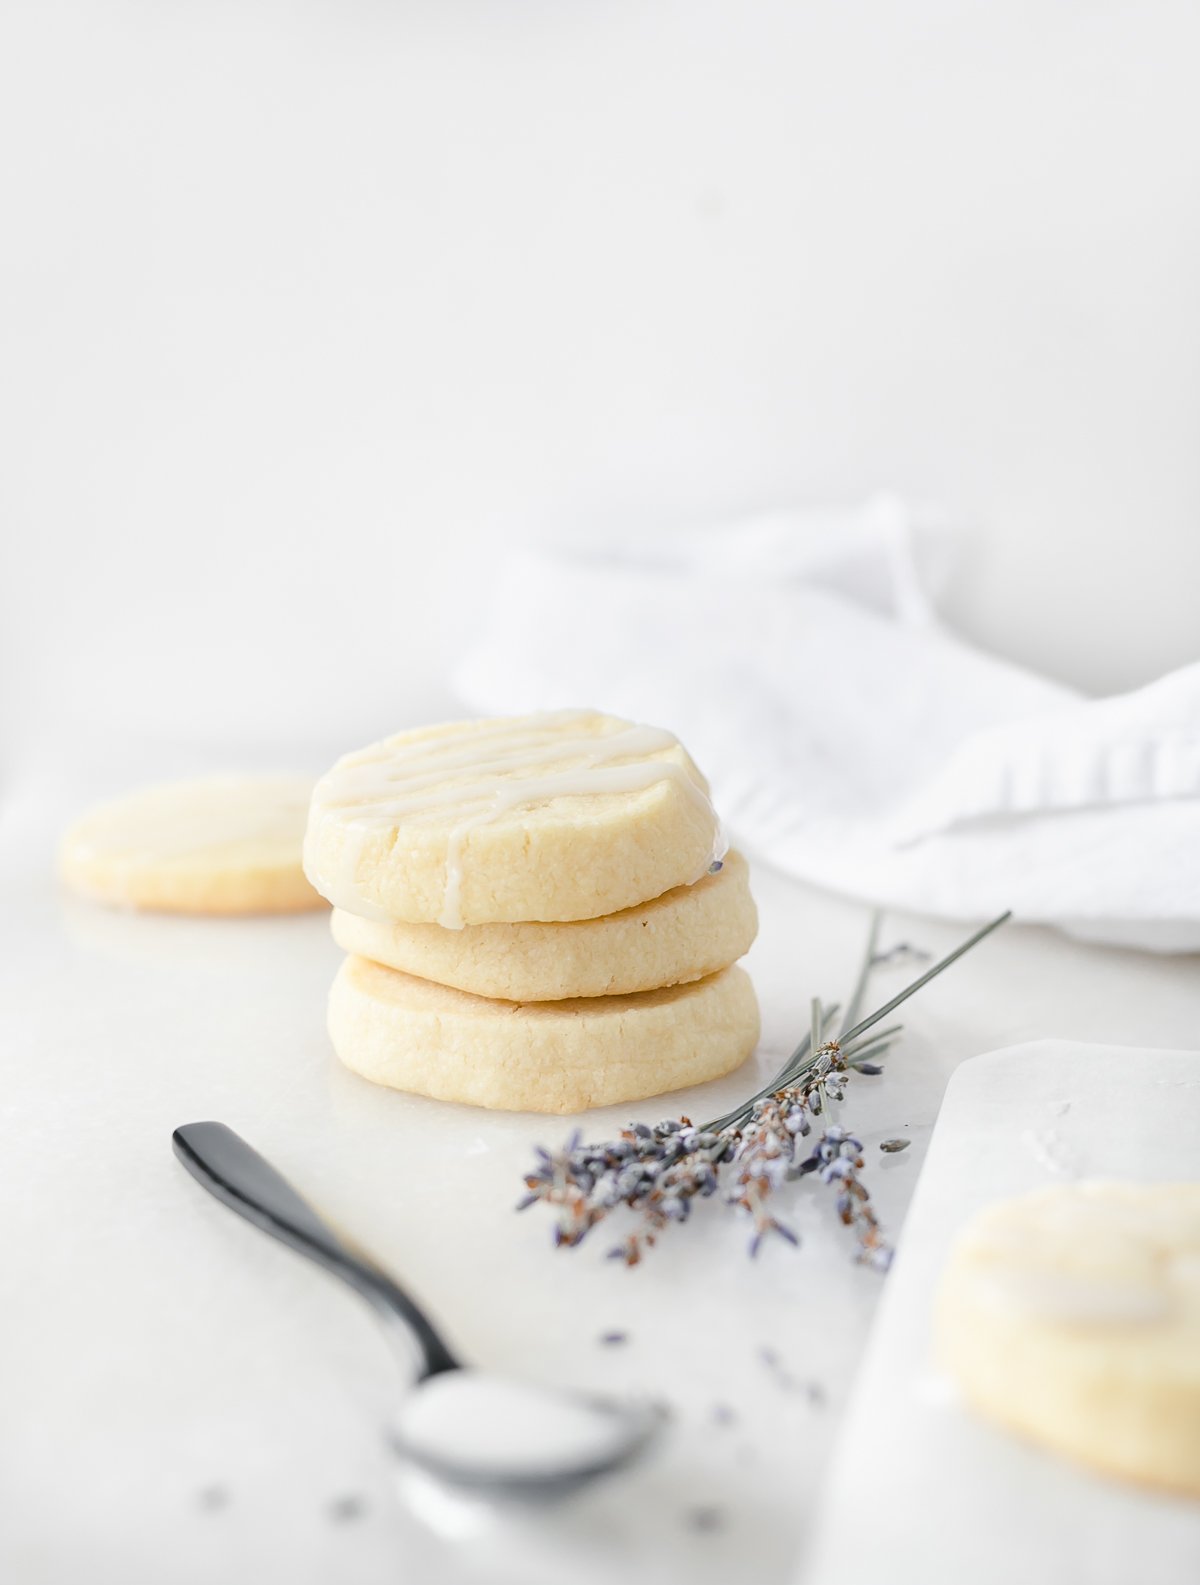 three stacked lavender shortbread cookies with dried lavender sprigs beside them and a spoonful of glaze in the foreground.